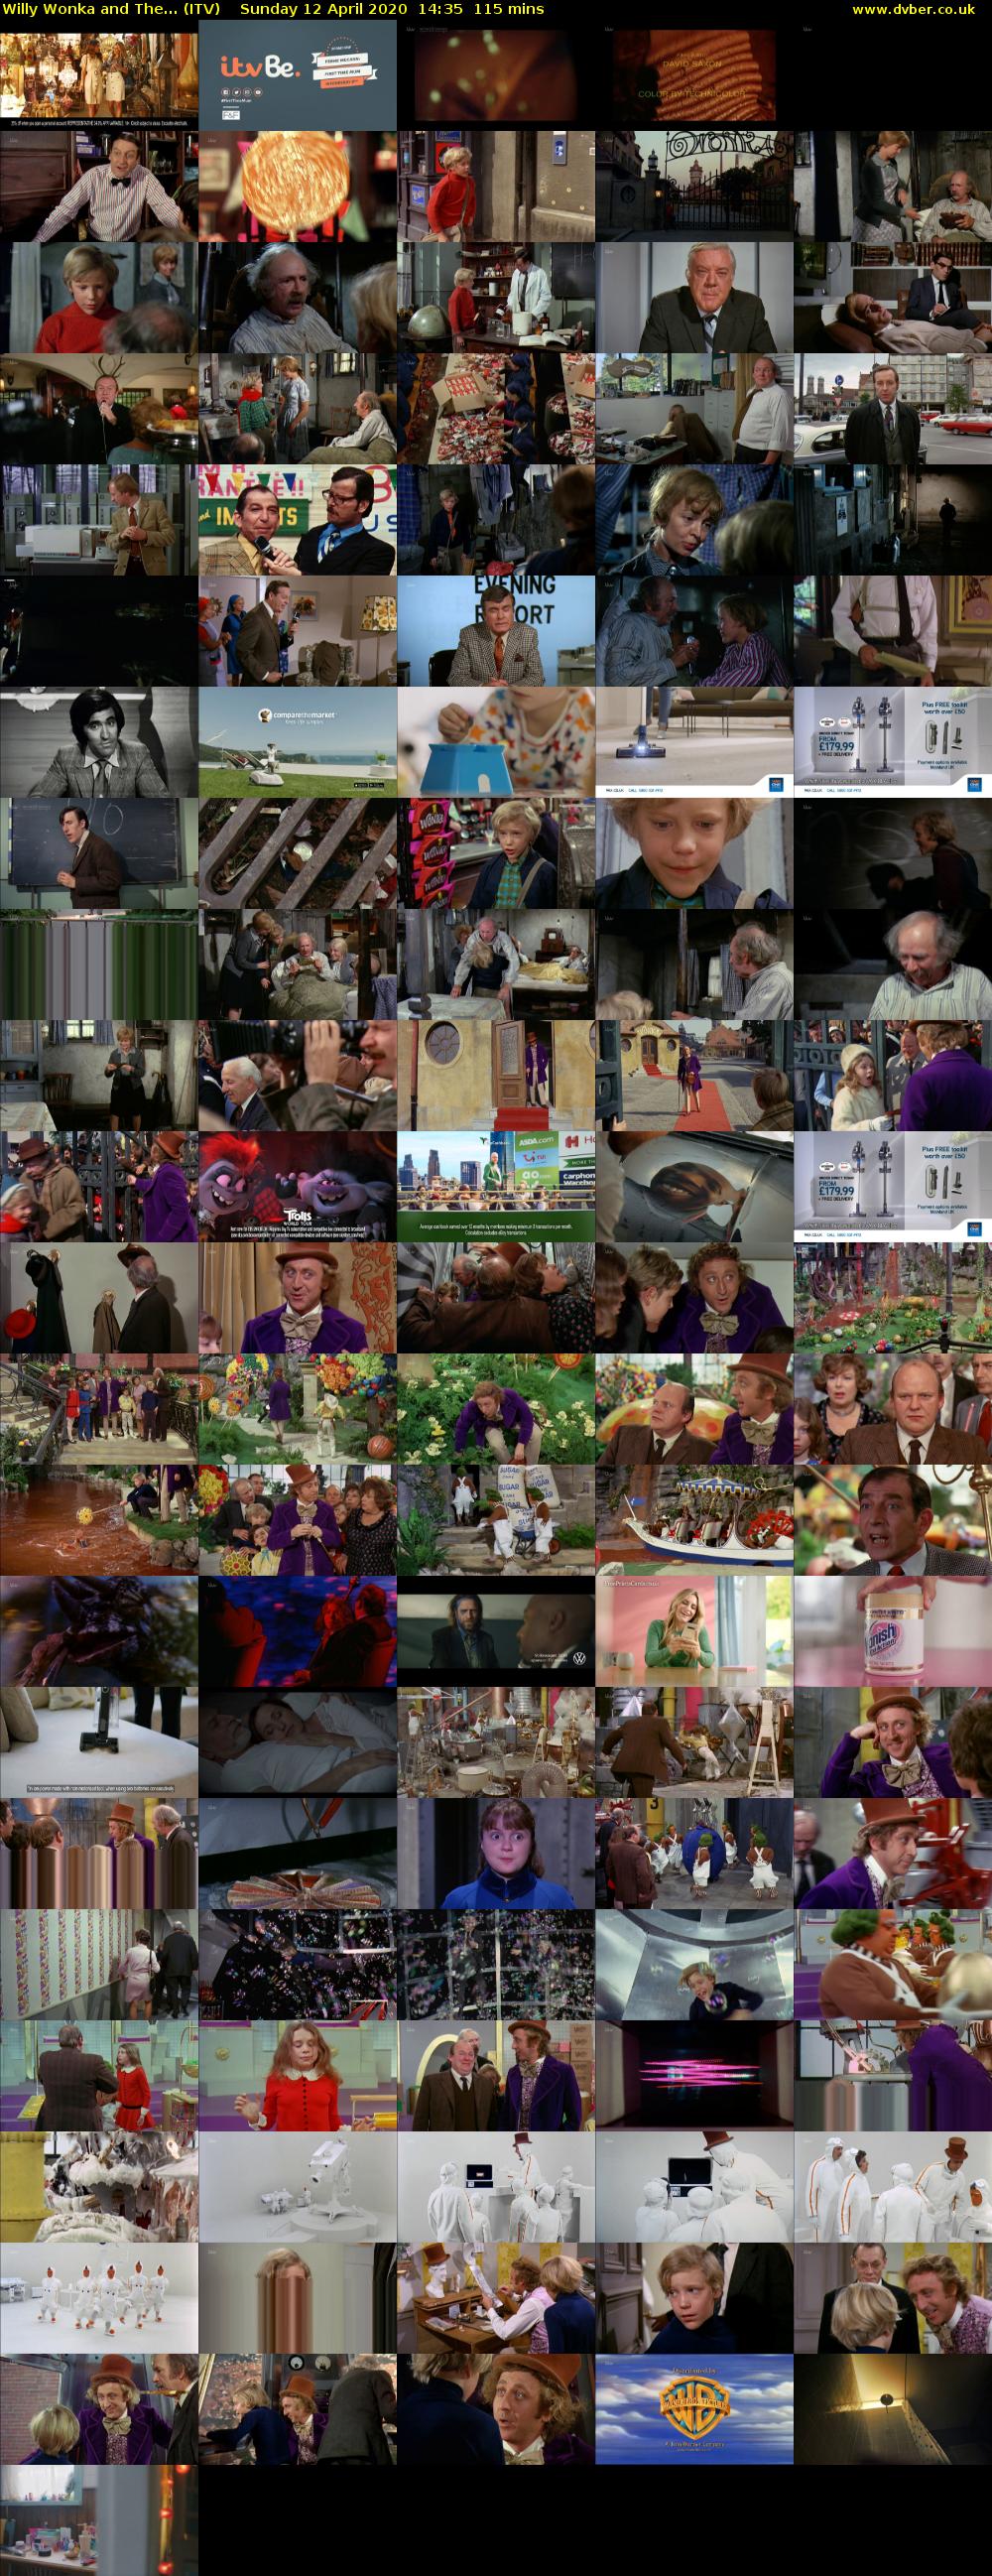 Willy Wonka and The... (ITV) Sunday 12 April 2020 14:35 - 16:30